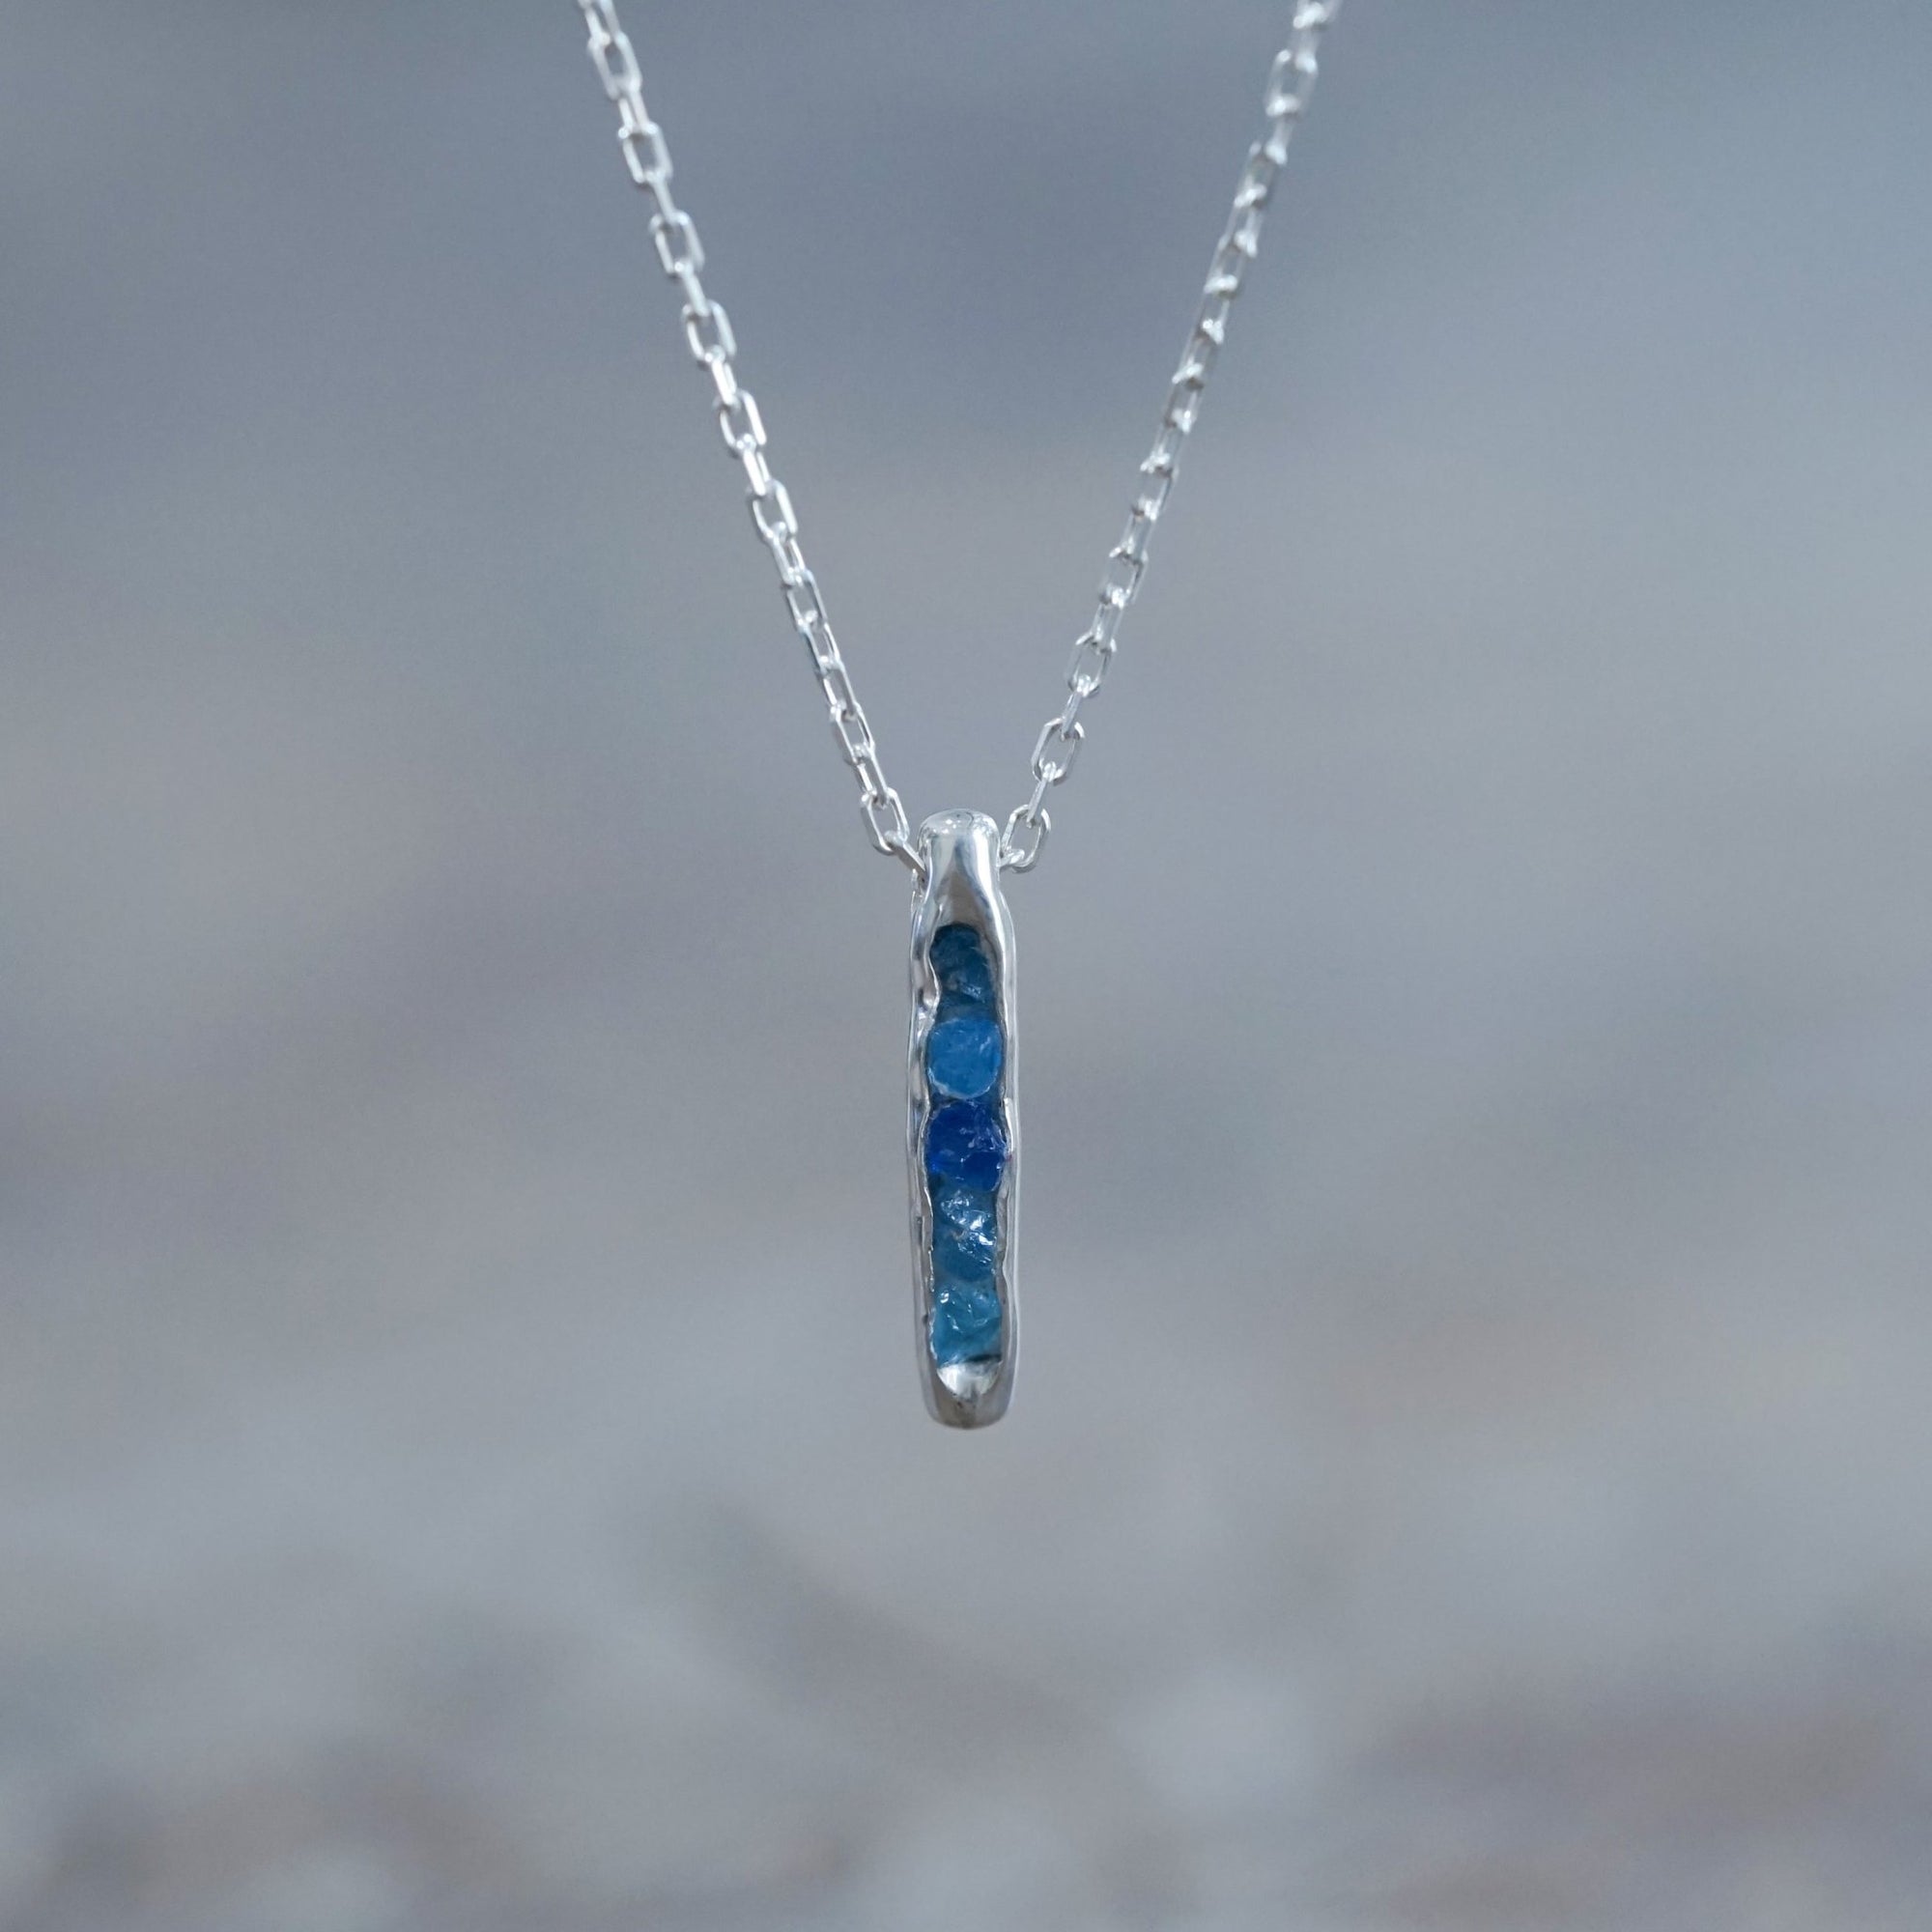 Blue Hauyne Necklace with Hidden Gems - Gardens of the Sun | Ethical Jewelry